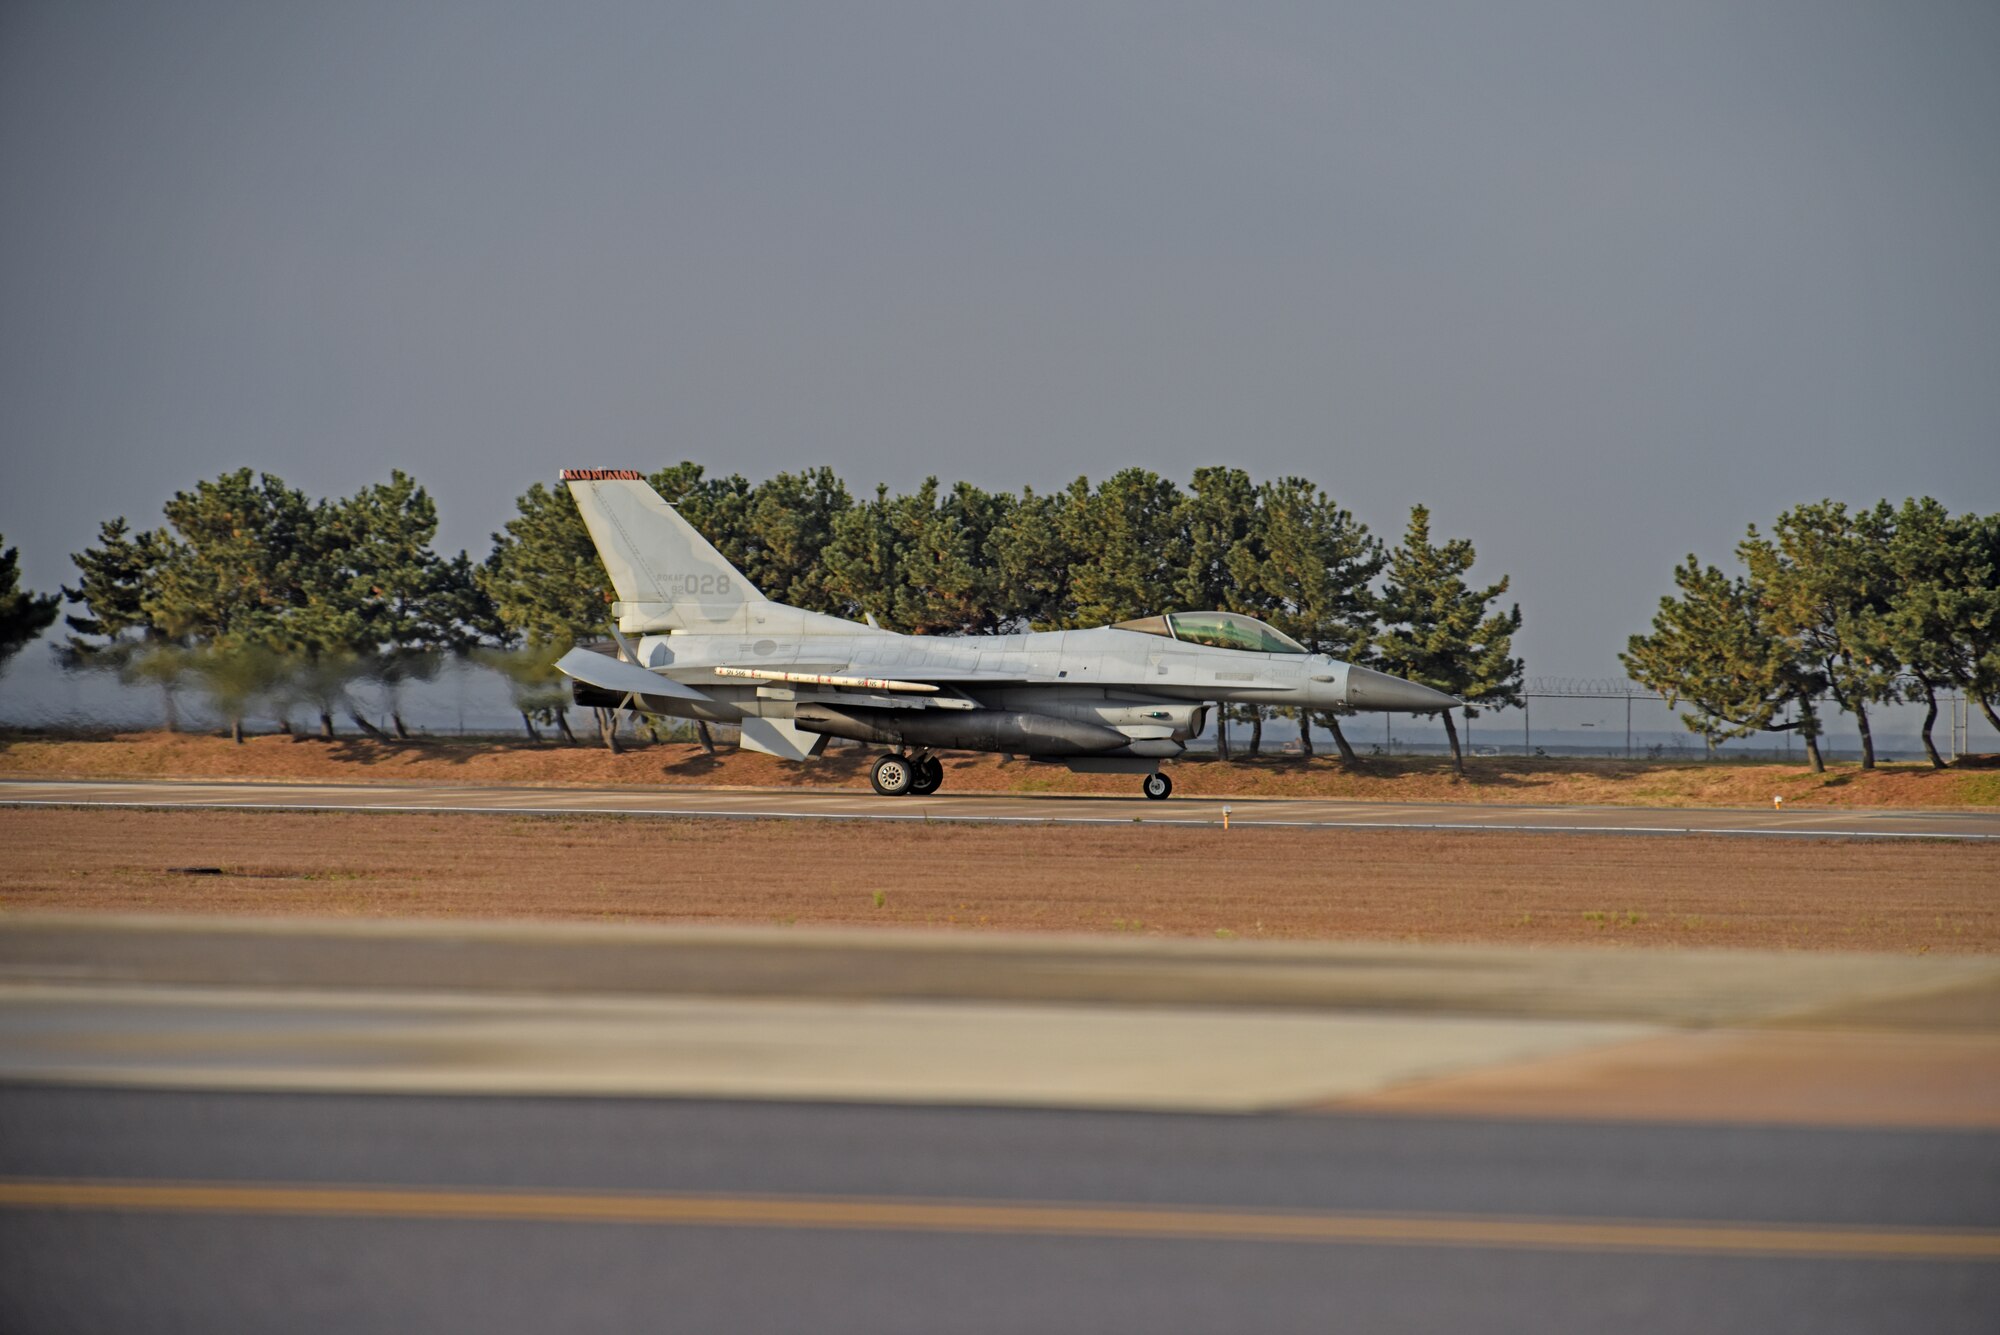 A Republic of Korea Air Force KF-16 Fighting Falcon assigned to the 38th Fighter Group lands at Kunsan Air Base, Republic of Korea, Nov. 19, 2019. The 8th Fighter Wing and the 38th FG provide security, stability and prosperity on the Korean Peninsula and the Indo-Pacific region. (U.S. Air Force photo by Staff Sgt. Mackenzie Mendez)